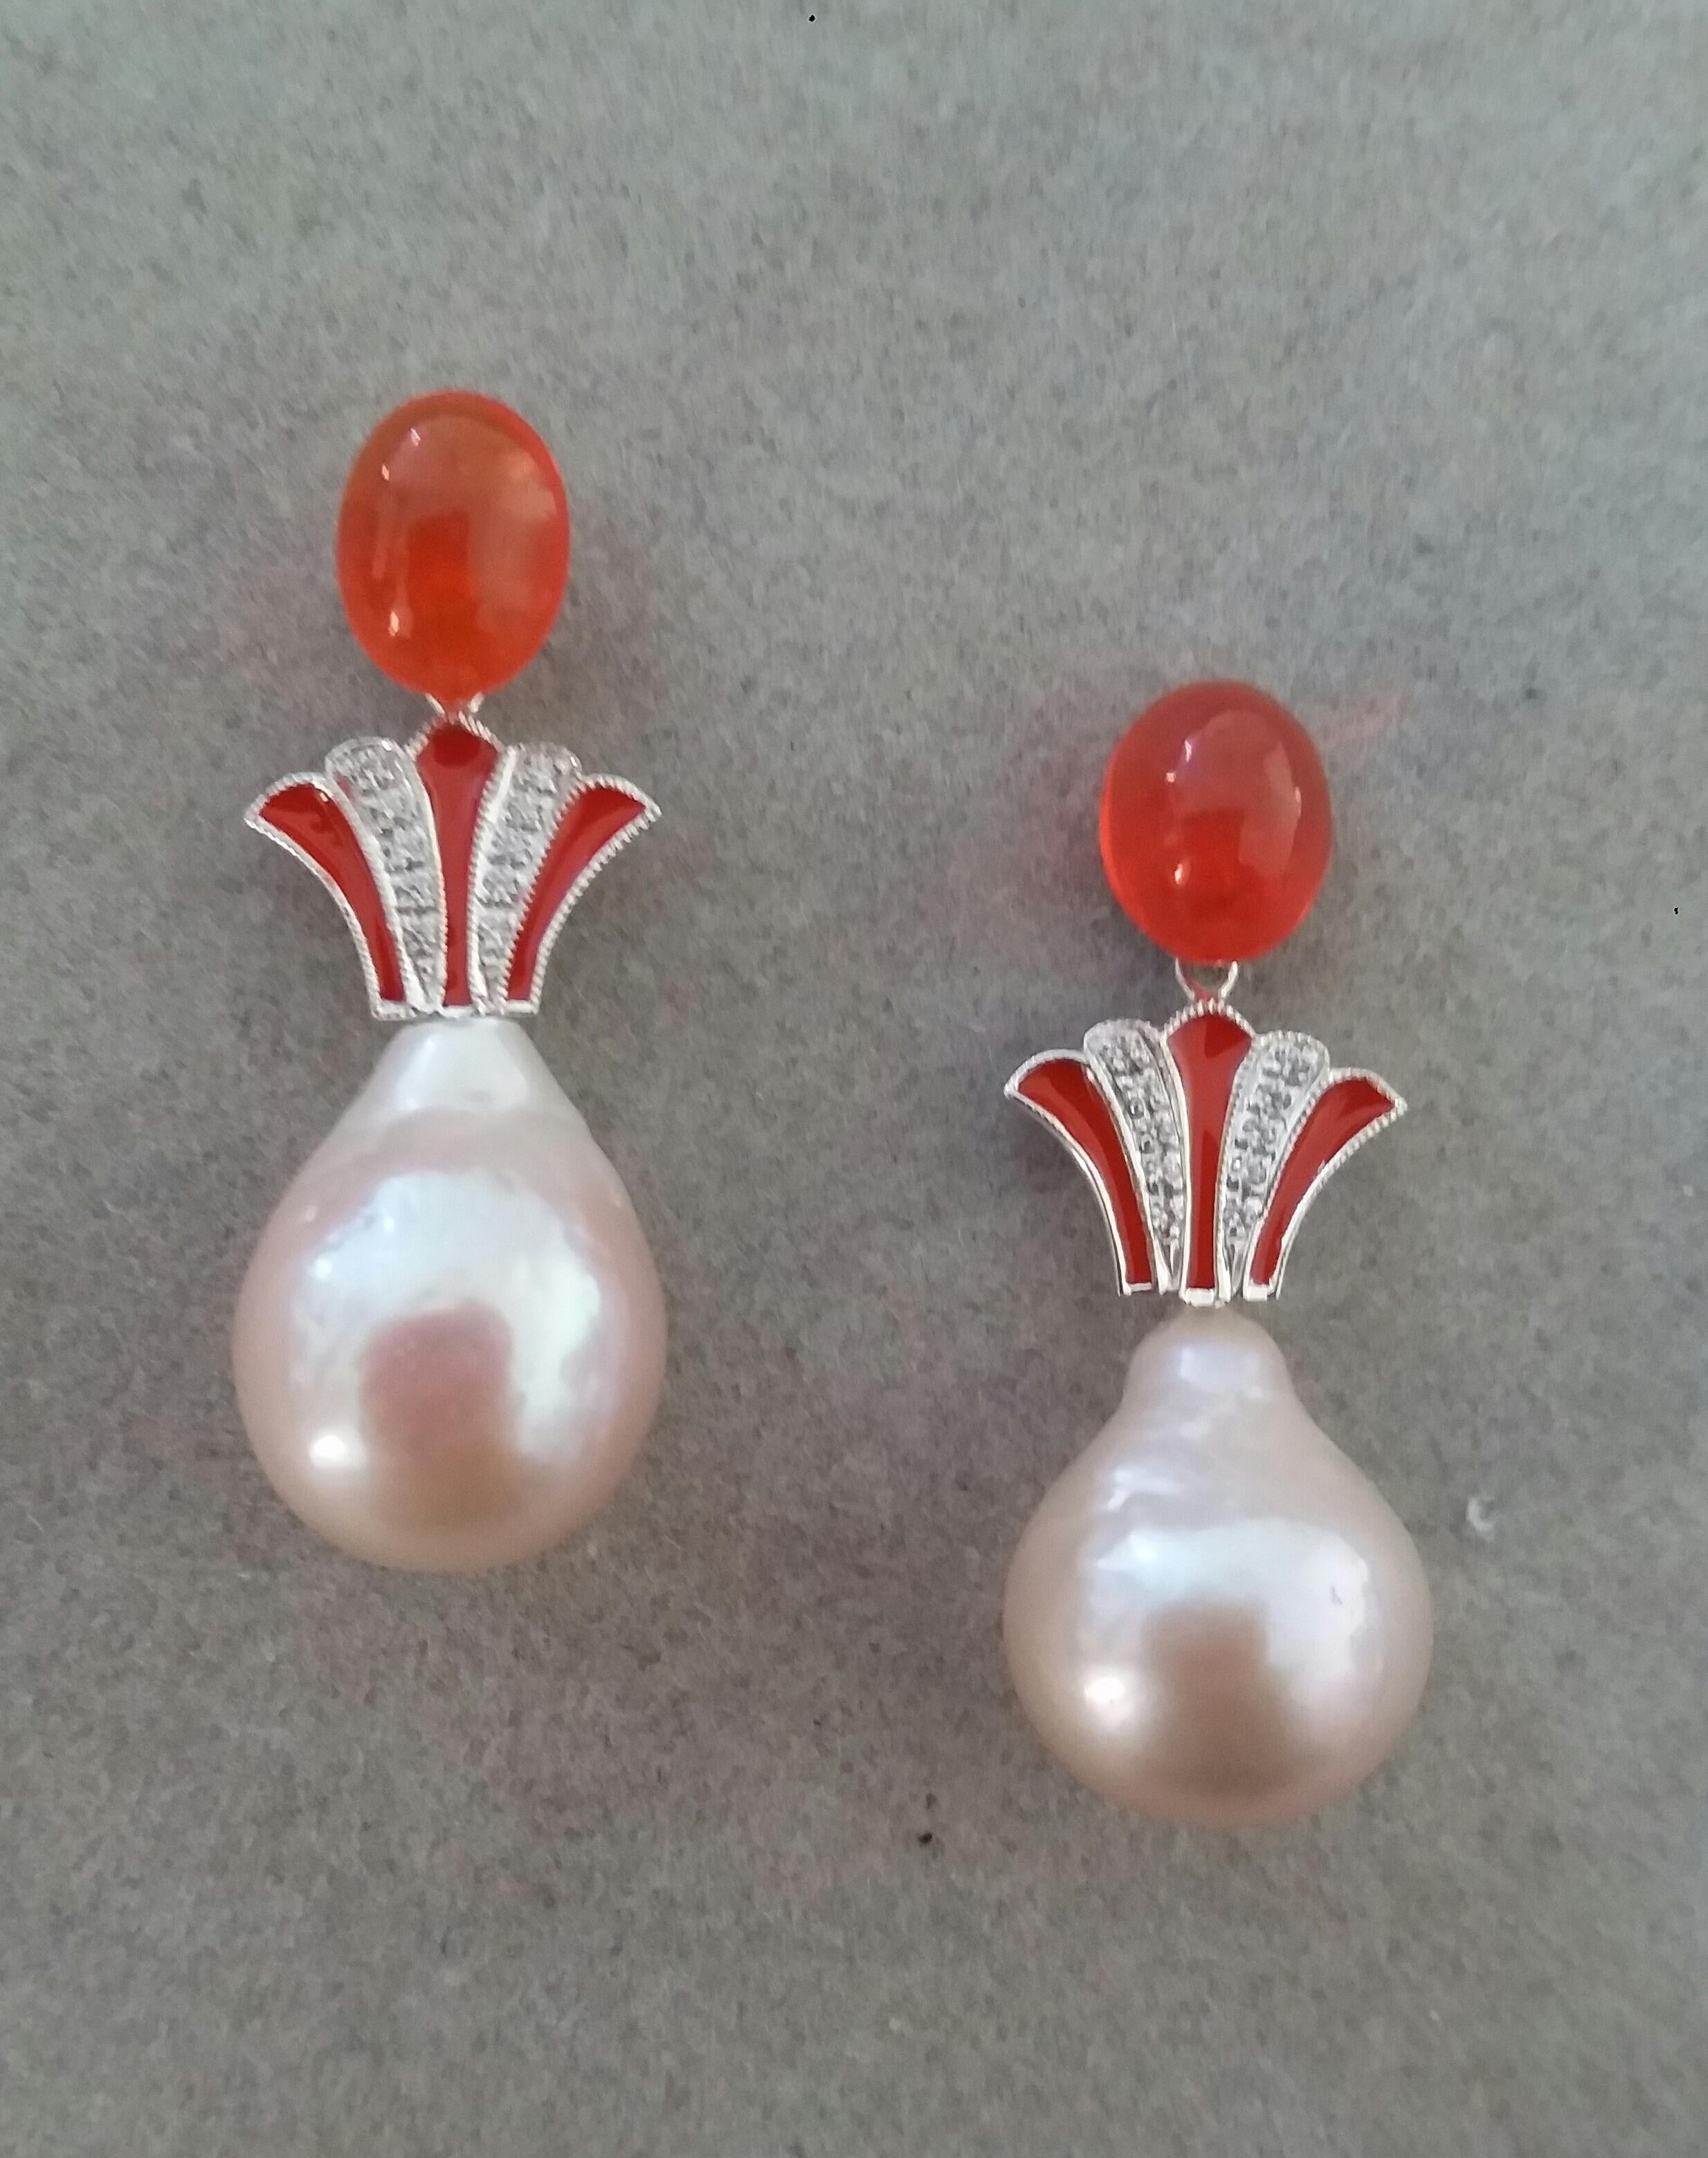 Unique pair of earrings with on top a pair of oval Fire Opal cabs ( 7 x 9 mm) ,a central part composed of  two  14 kt. White Gold elements in a Crown shape with 20 full cut round Diamonds and Orange Enamel. In the bottom parts we have 2 e Natural 